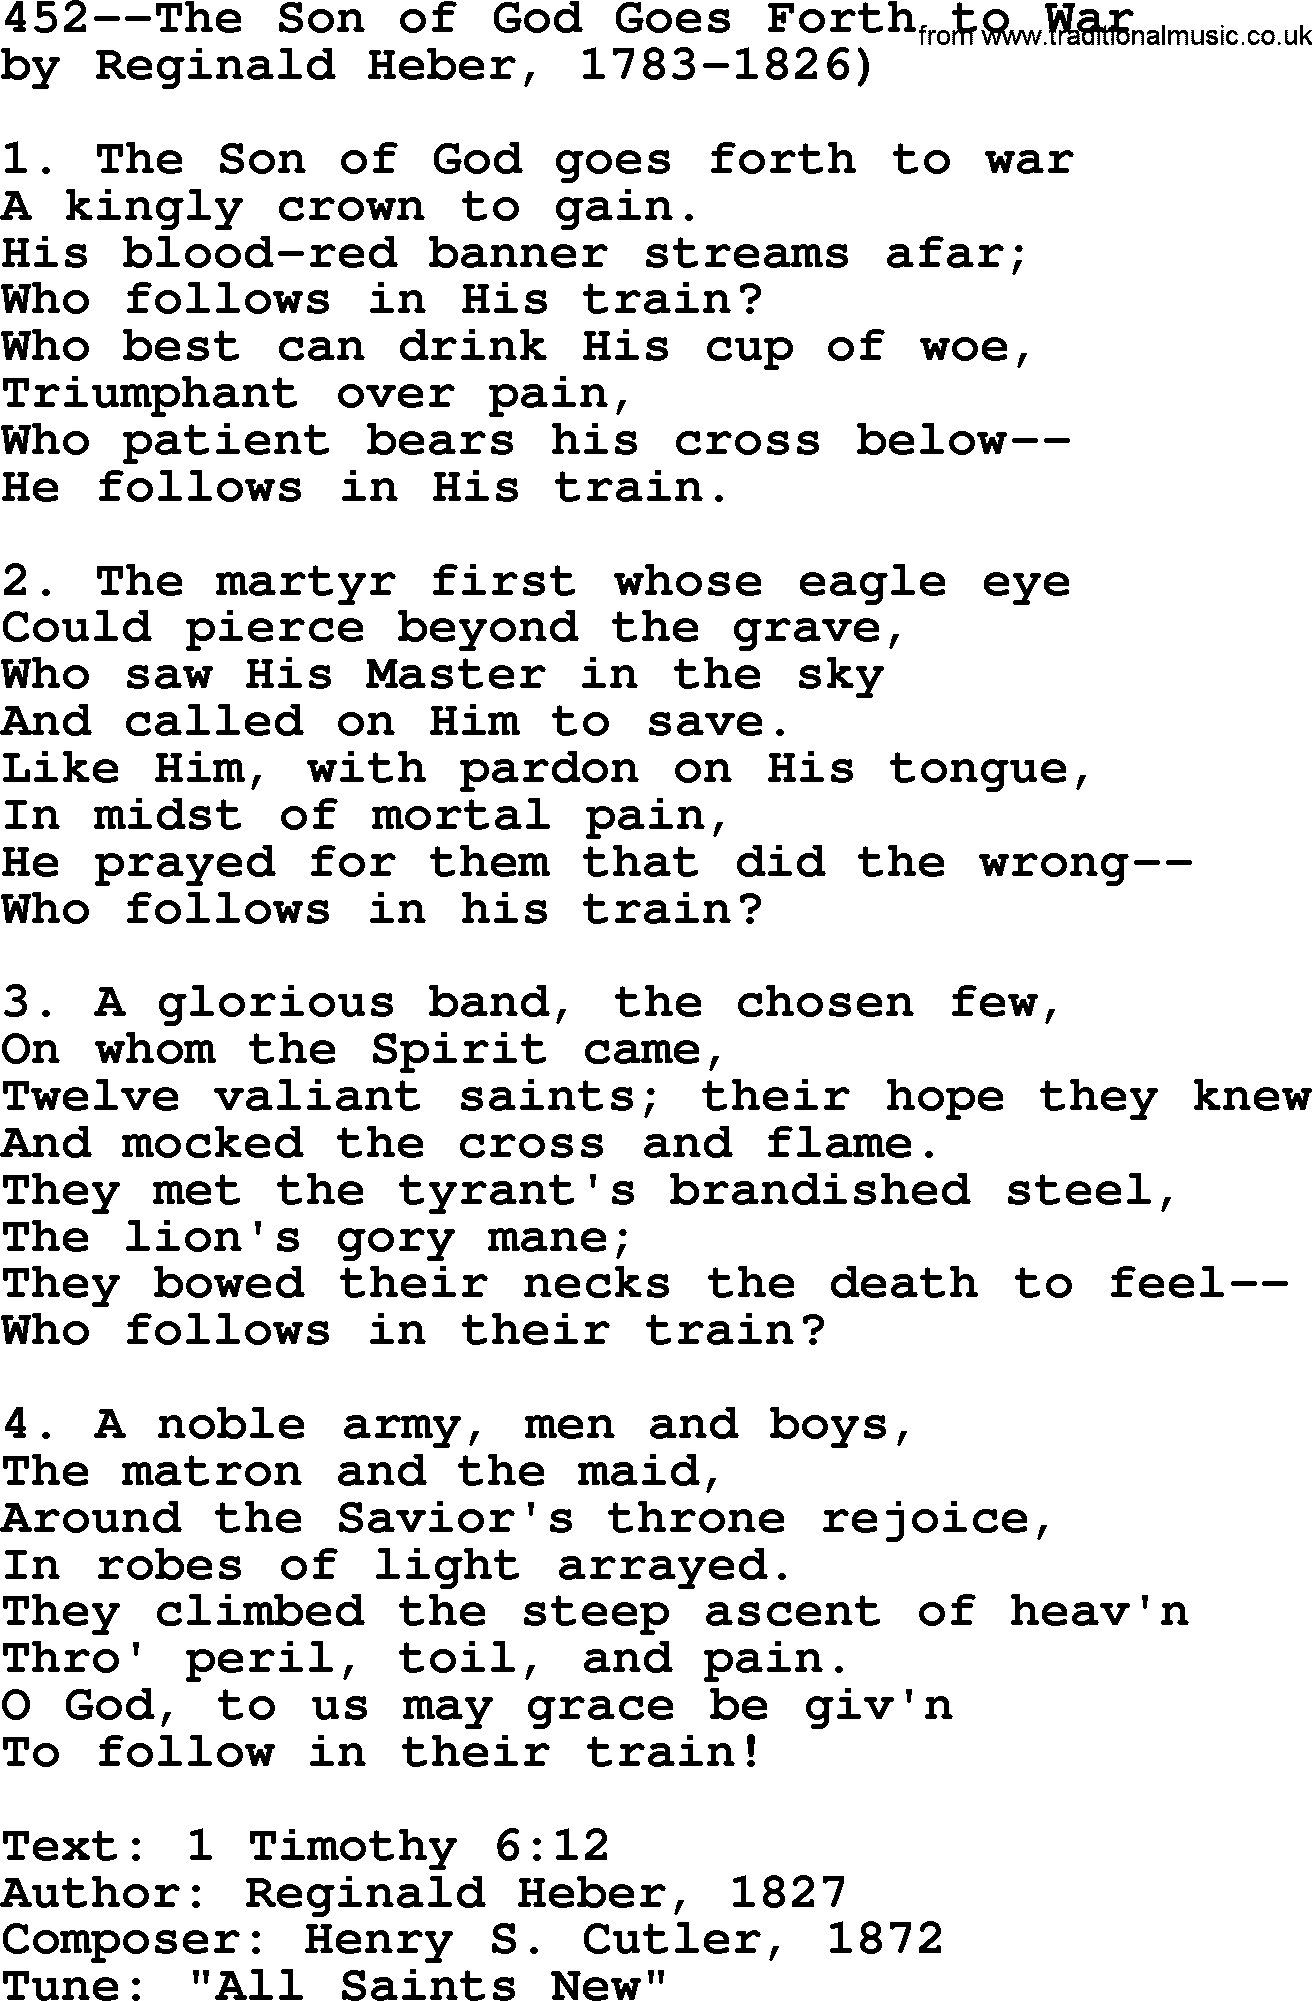 Lutheran Hymn: 452--The Son of God Goes Forth to War.txt lyrics with PDF